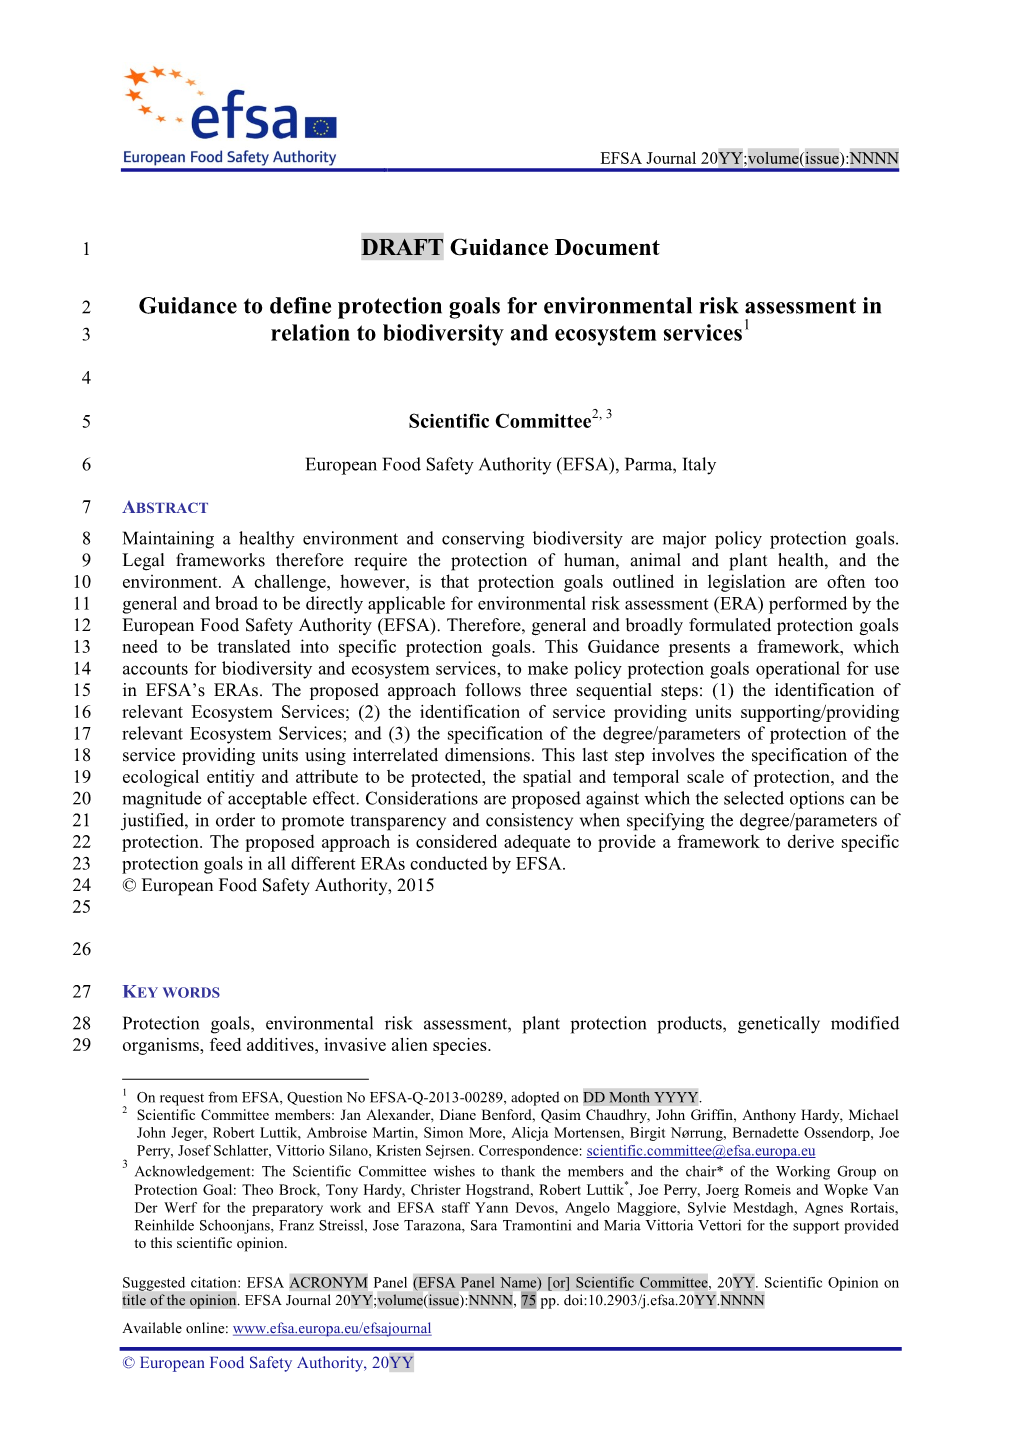 Guidance to Define Protection Goals for Environmental Risk Assessment in 1 3 Relation to Biodiversity and Ecosystem Services